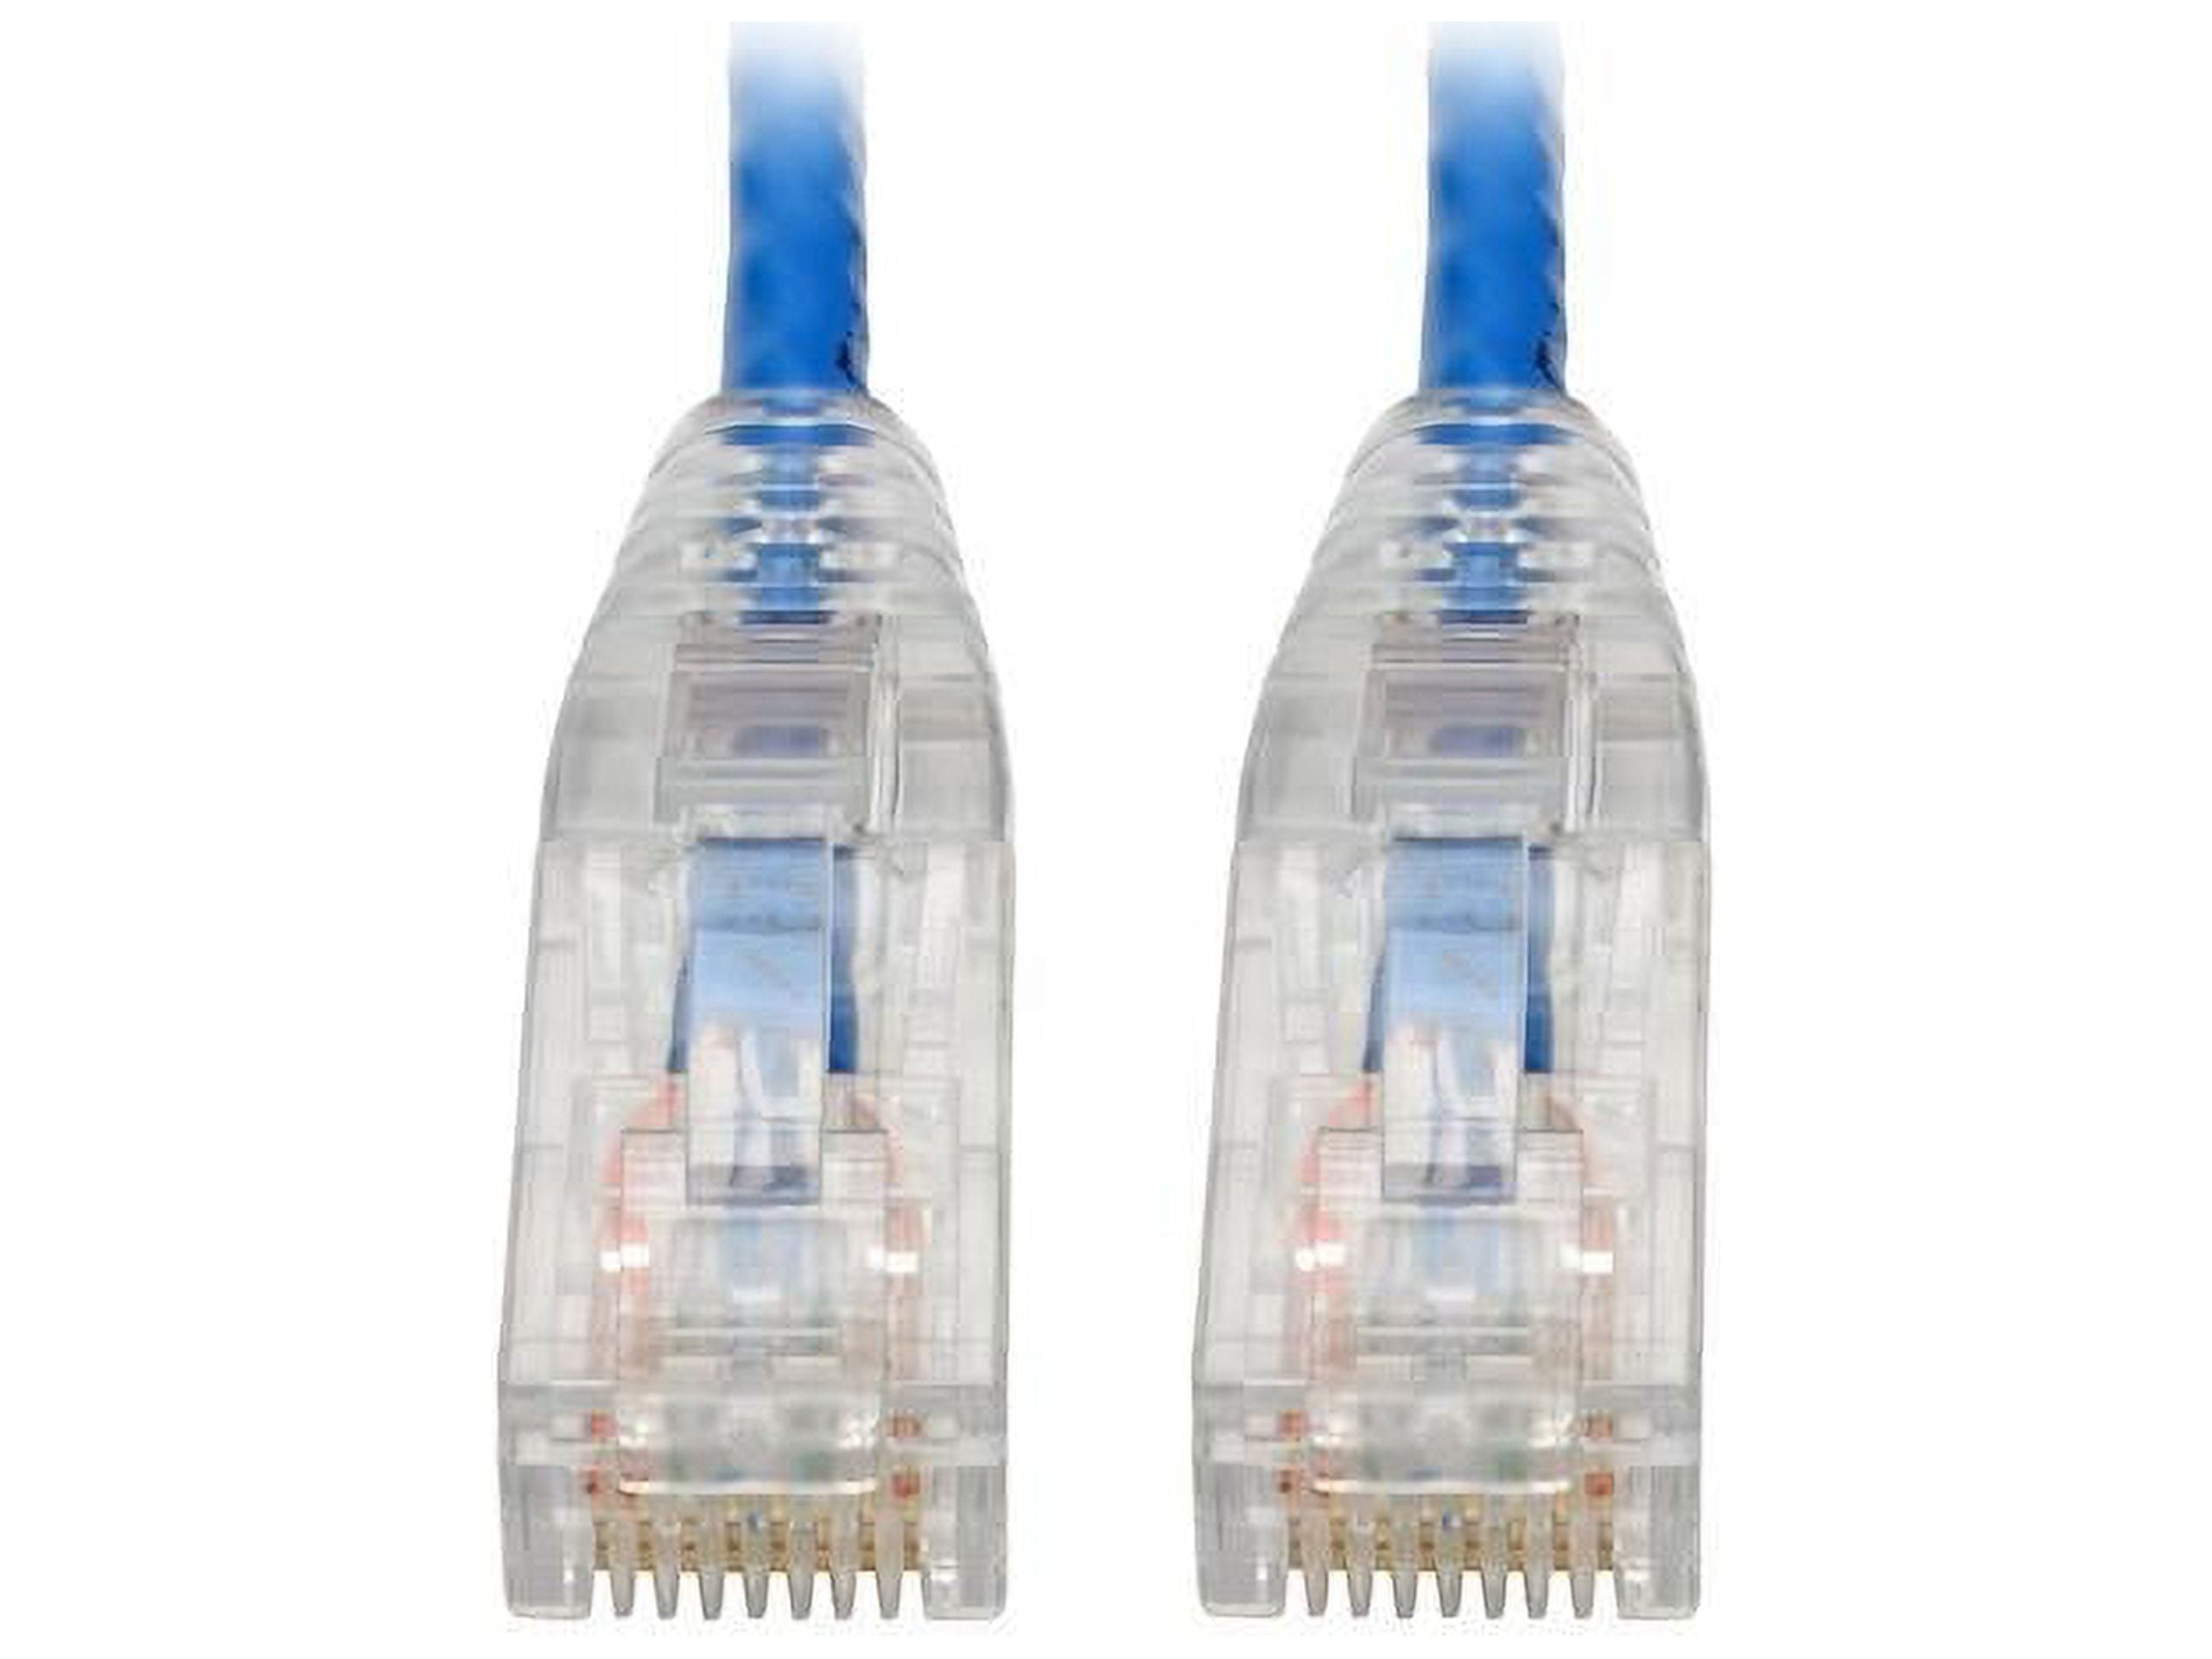 StarTech.com 10m CAT6 Ethernet Cable - Grey CAT 6 Gigabit Ethernet Wire  -650MHz 100W PoE++ RJ45 UTP Category 6 Network/Patch Cord Snagless w/Strain